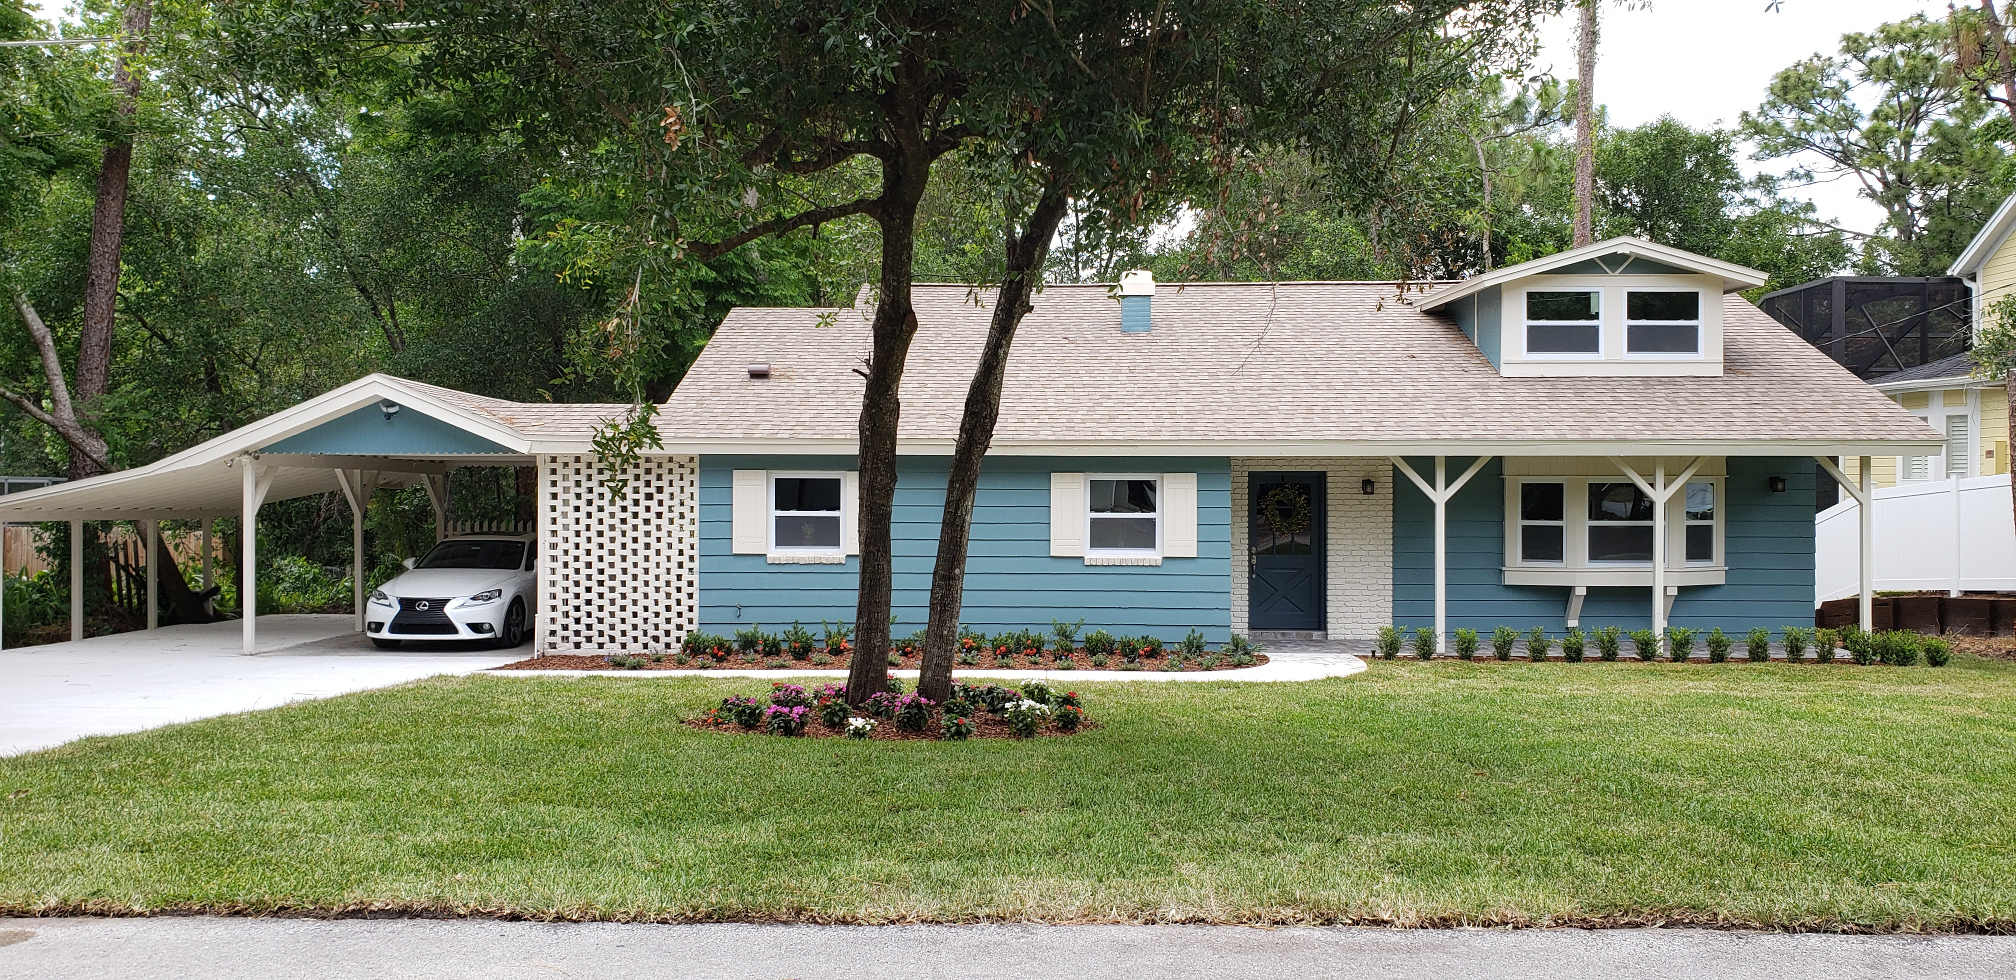 We bought this Blue House in Altamonte Springs